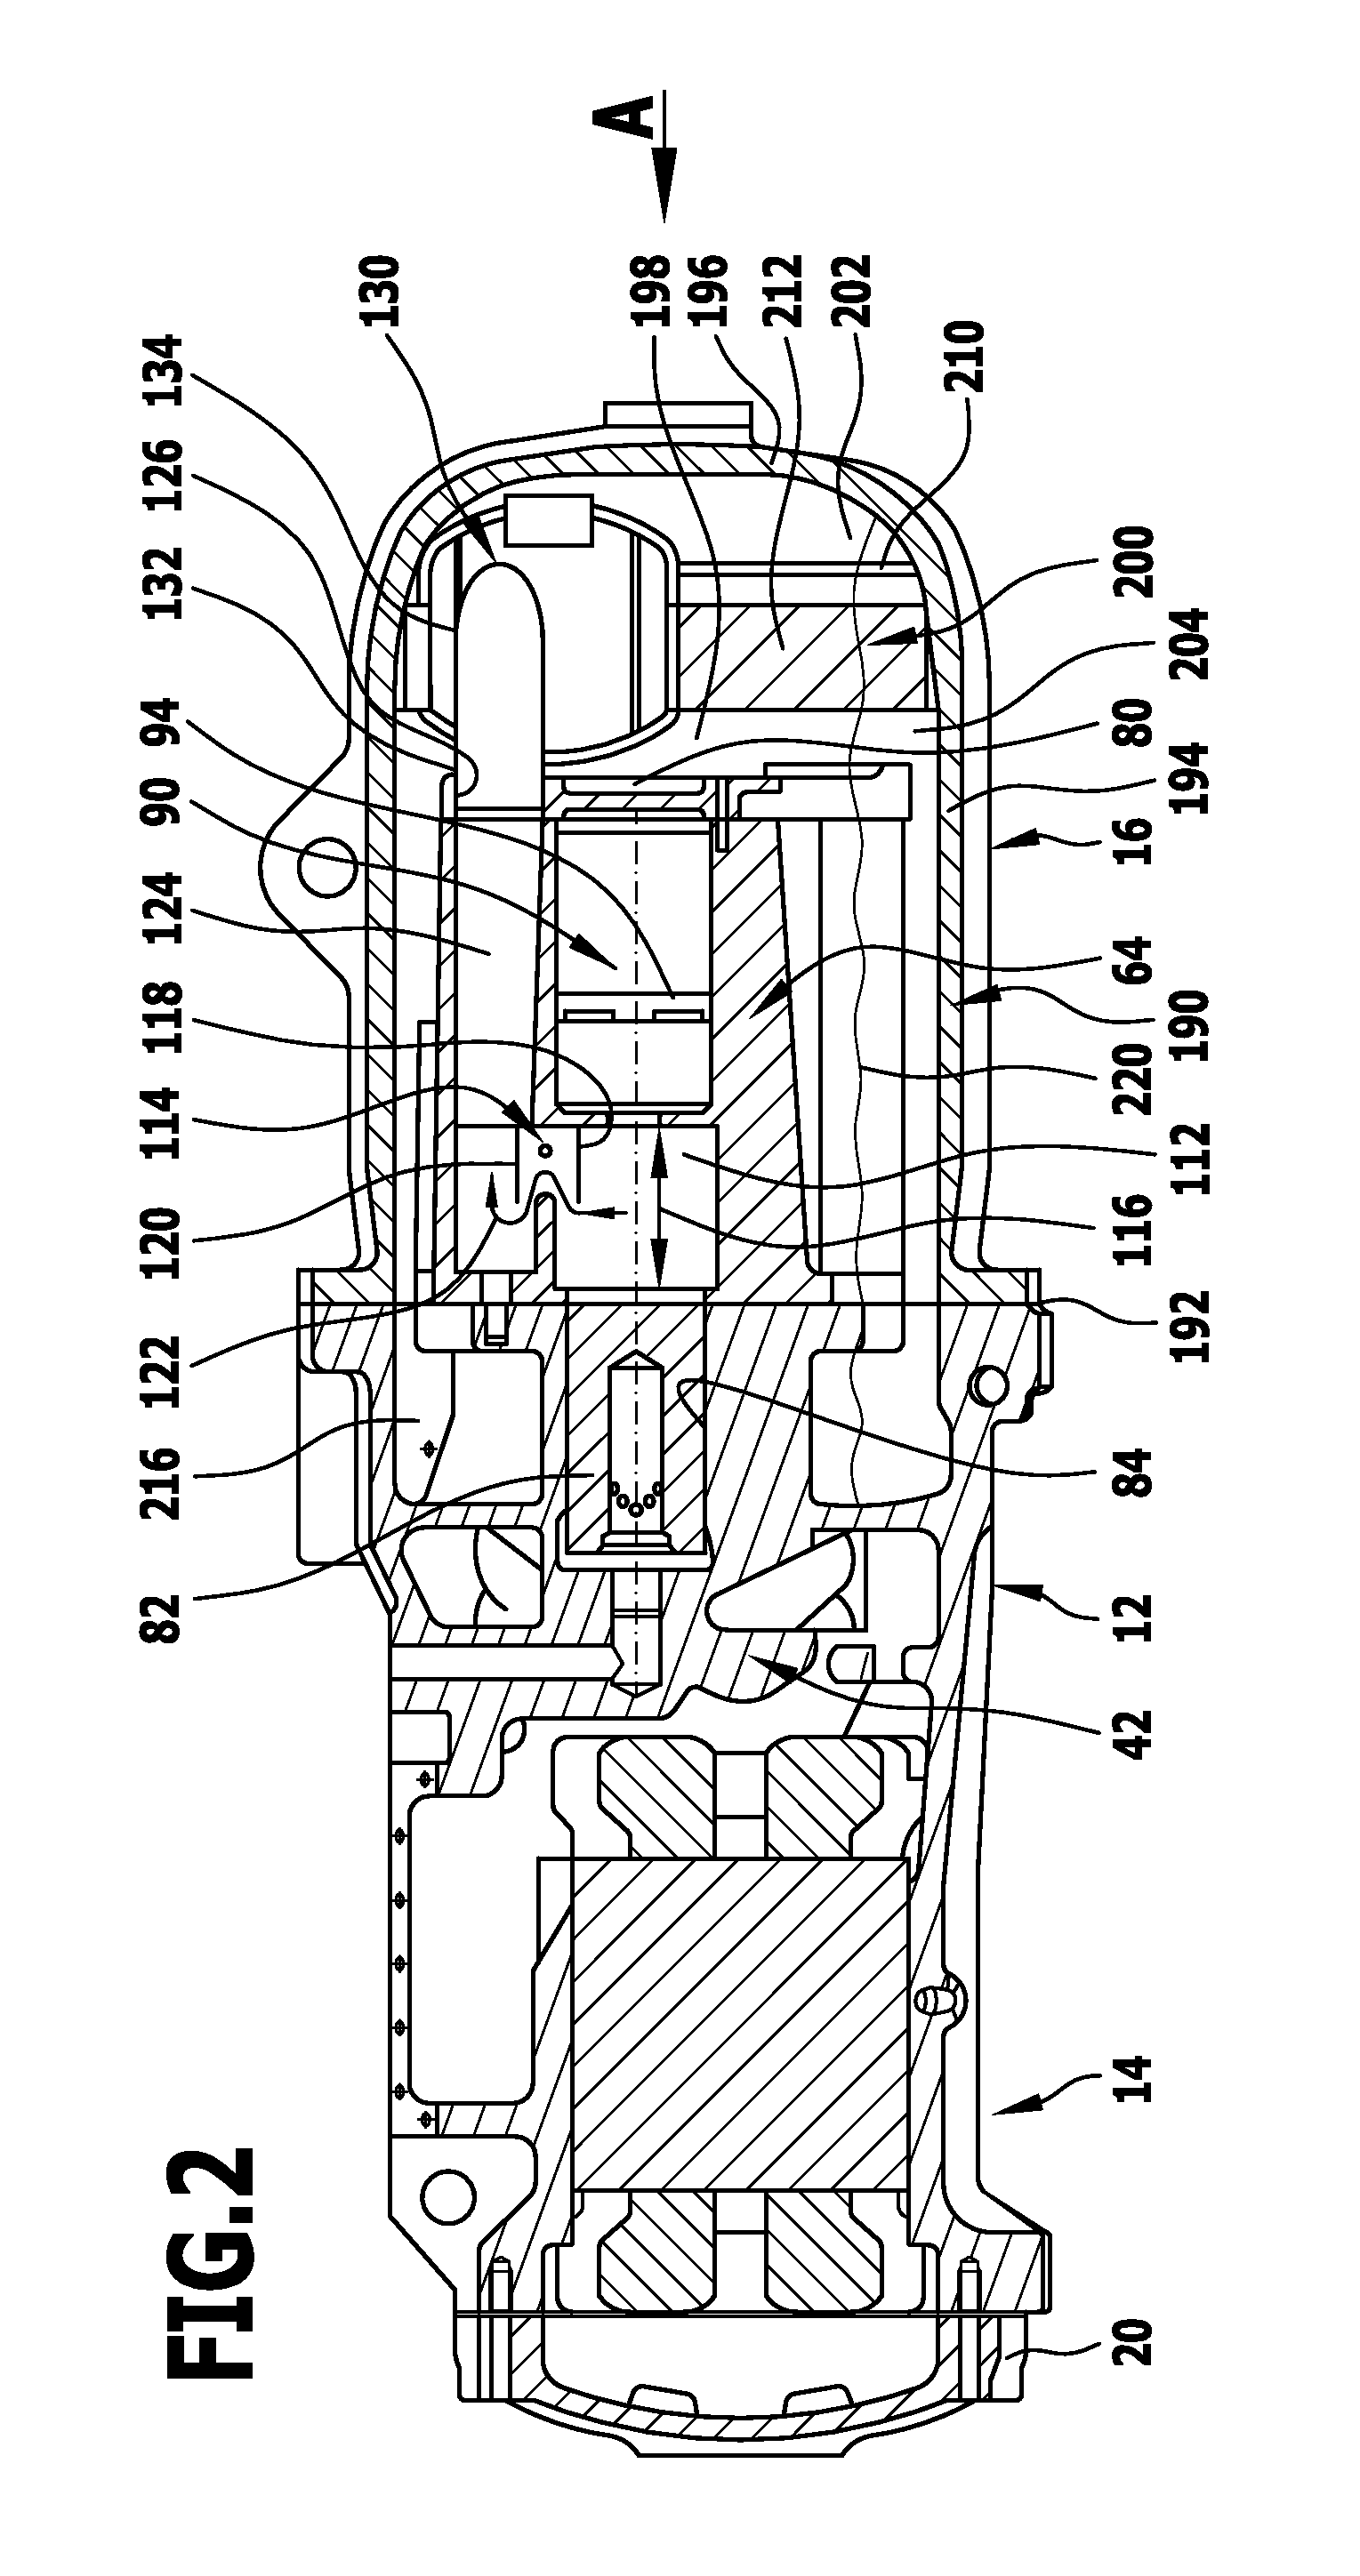 Screw compressor with a sound dampening device that separates lubricant